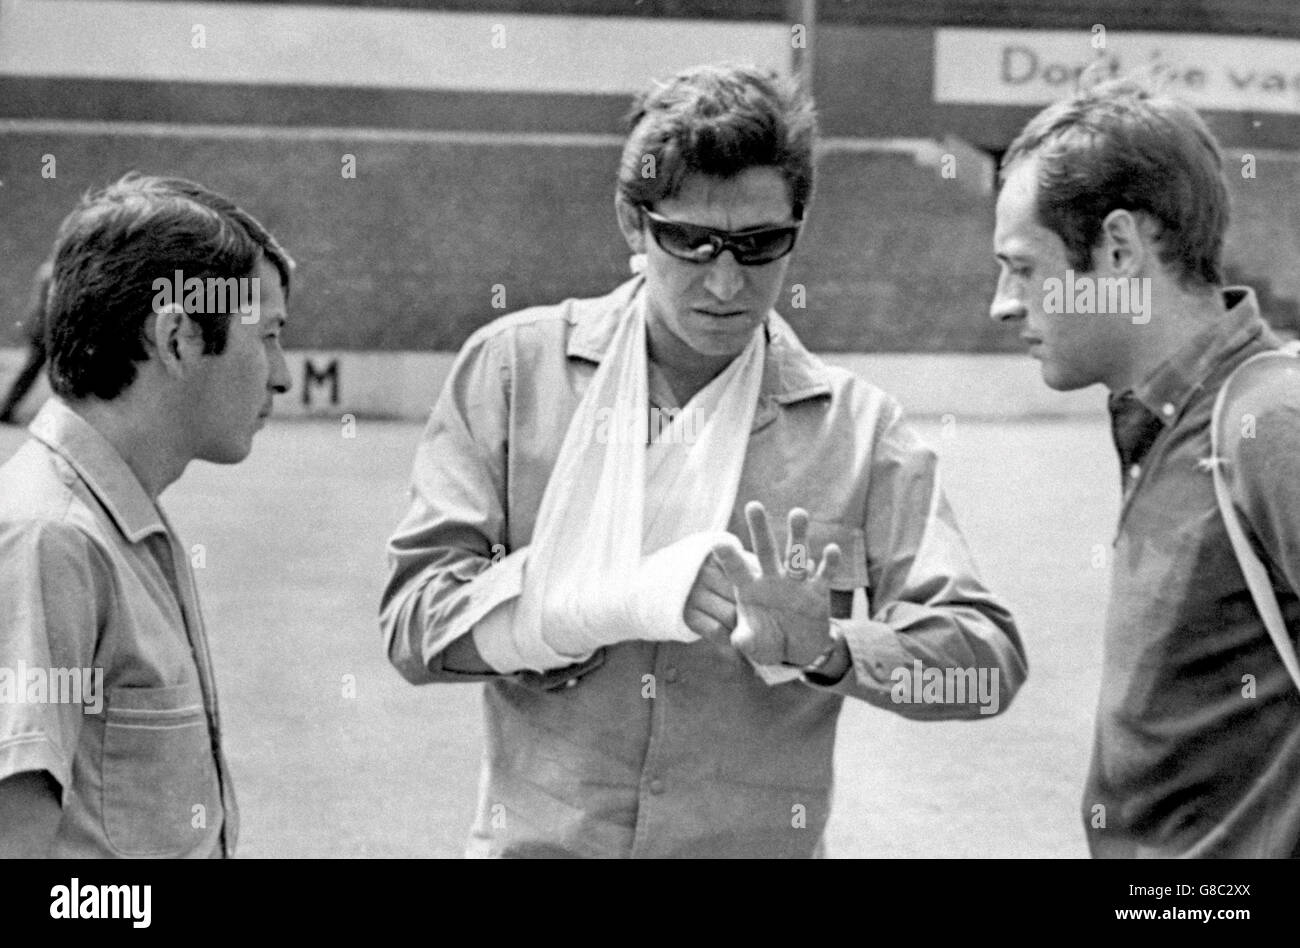 Soccer - World Cup England 1966 - Chile Training - Ayresome Park. Chile goalkeeper Adan Godoy (c) sports a cast and sling as he explains his injuries to teammates Stock Photo